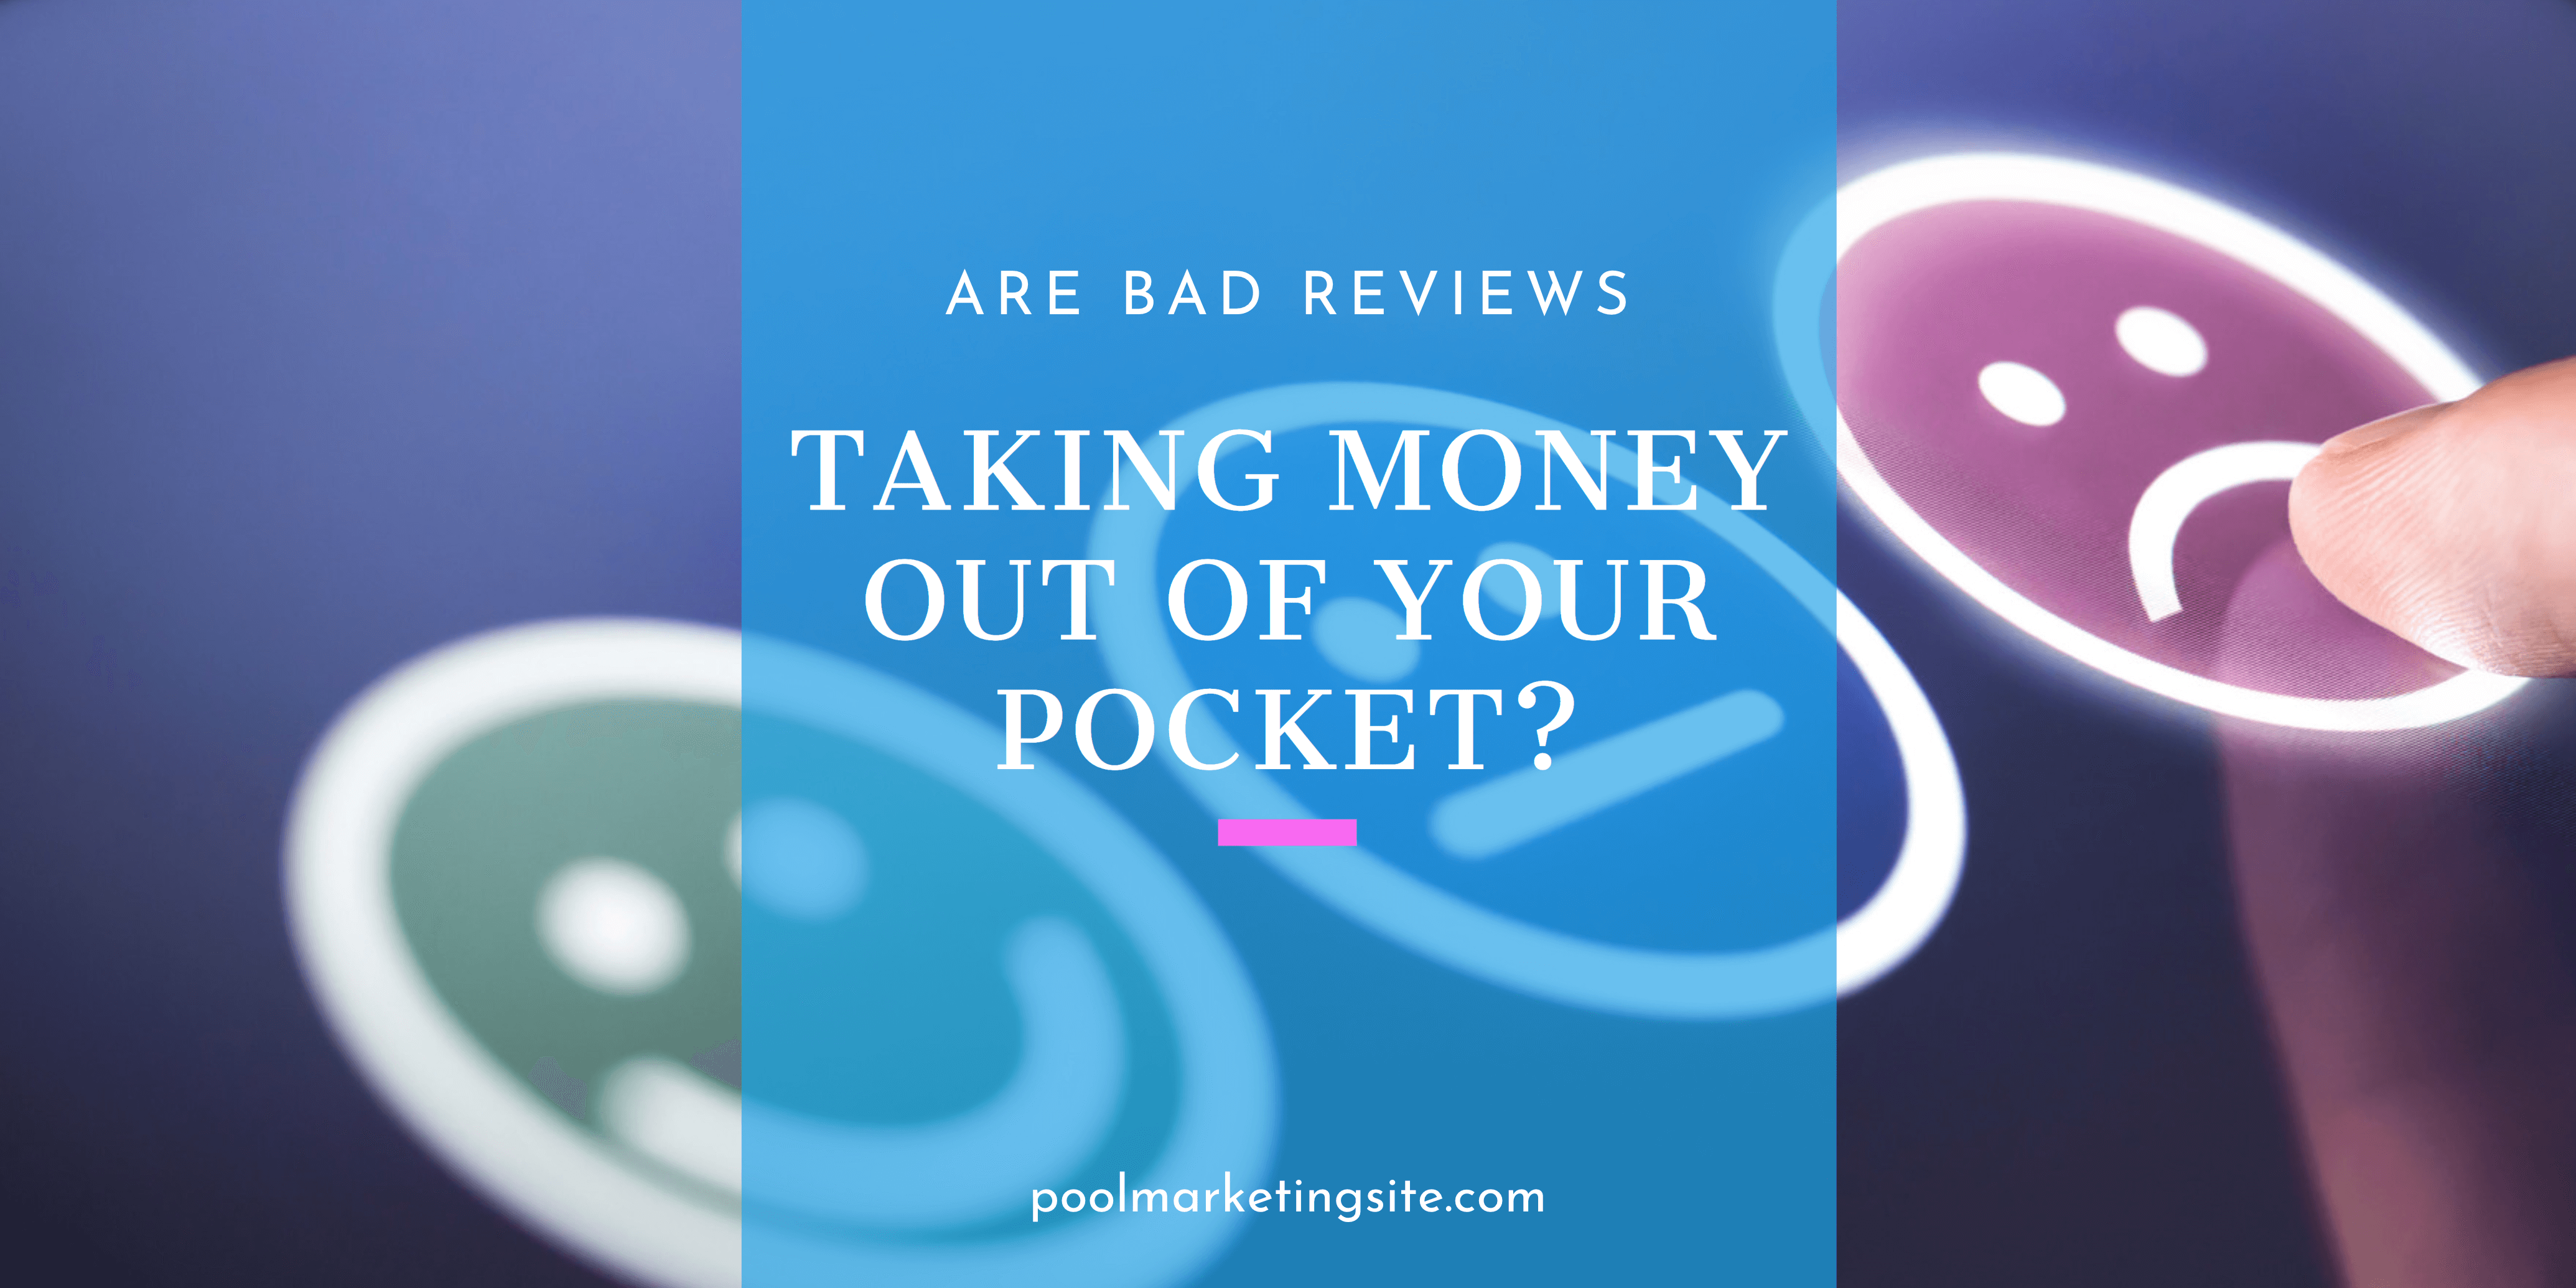 Are Bad Reviews Taking Money Out of Your Pocket?